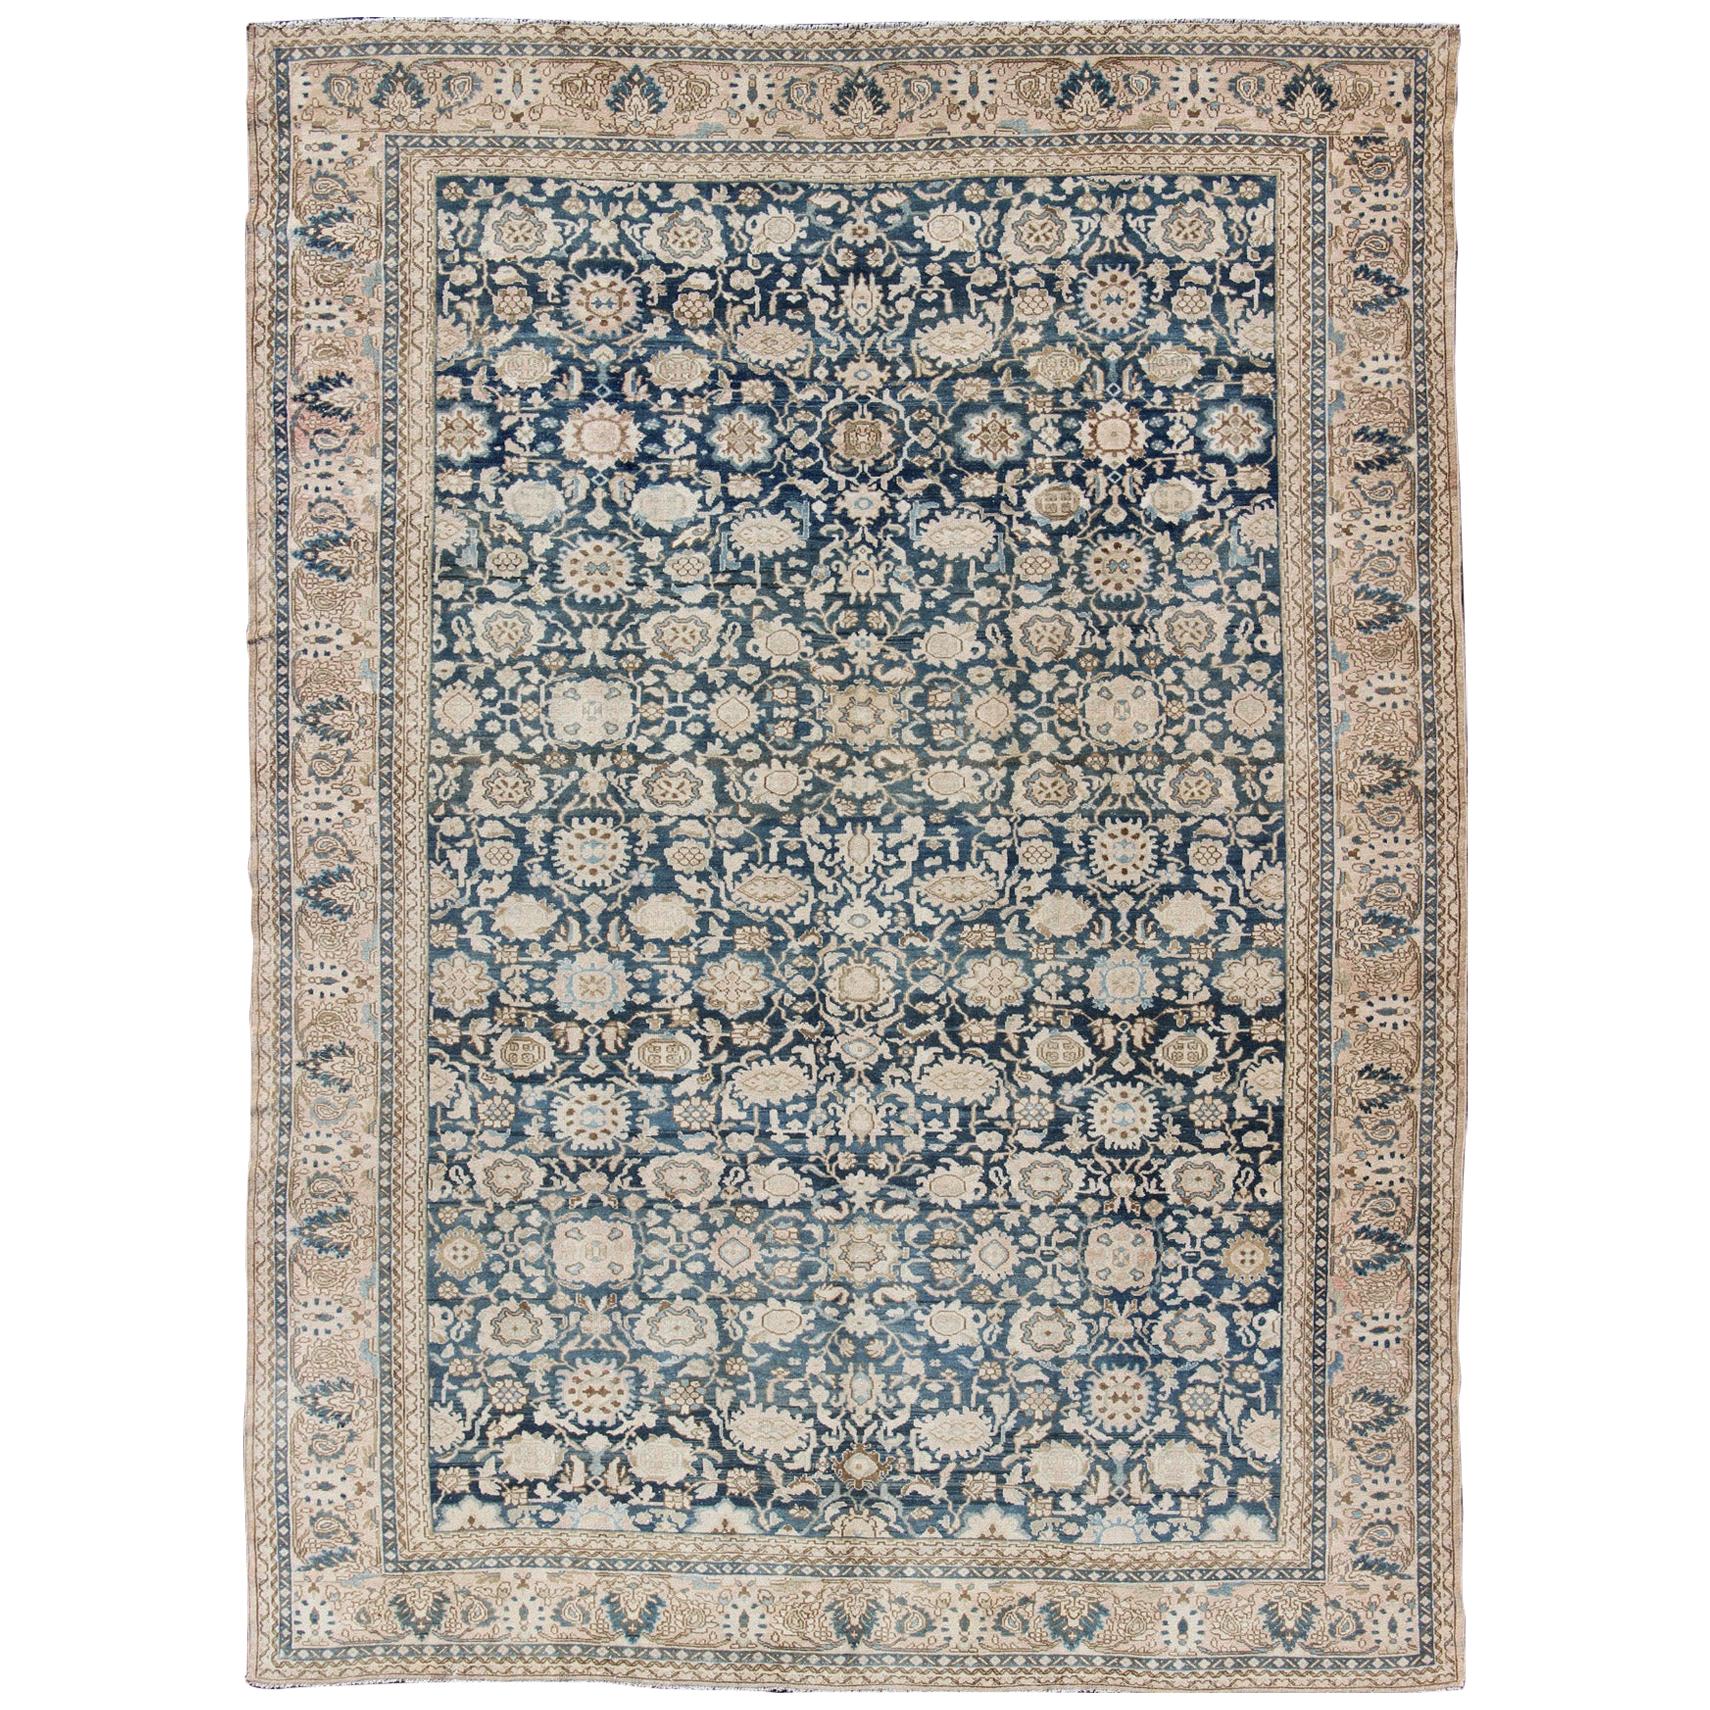 All-Over Blue Floral Persian Hamadan Rug in Navy Blue and Earthy Tones